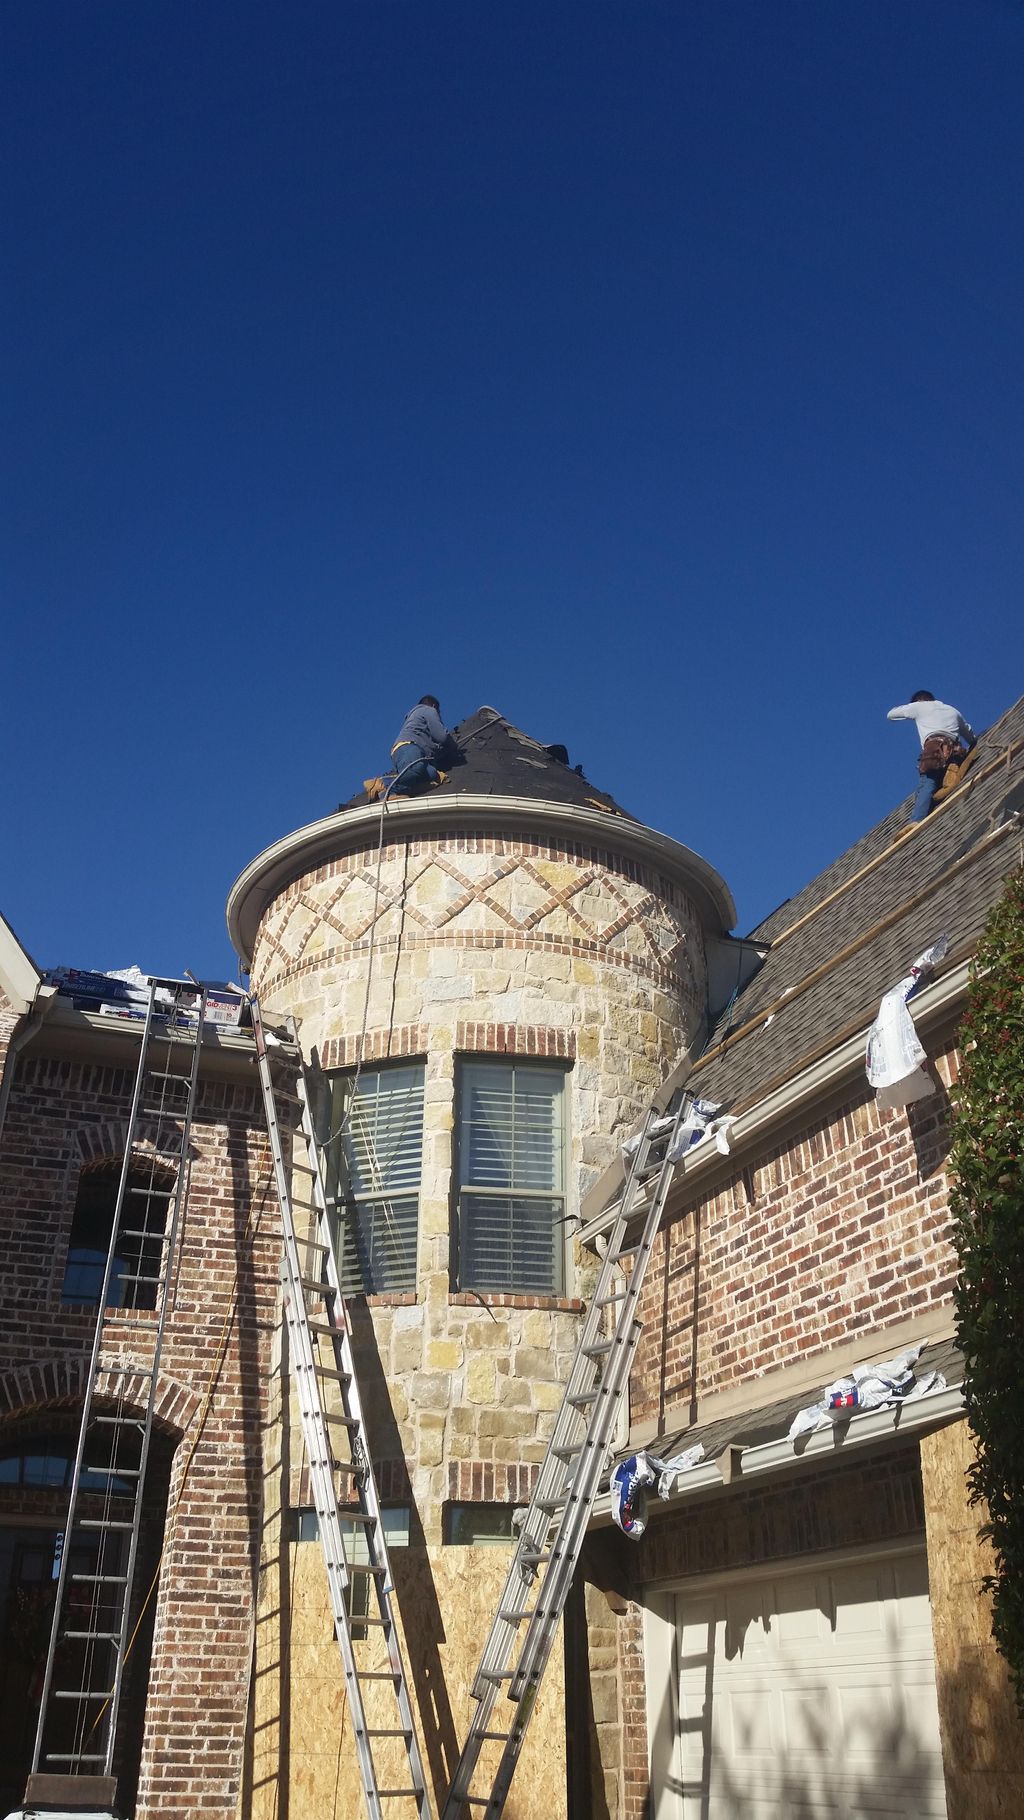 Diegos roofing labor